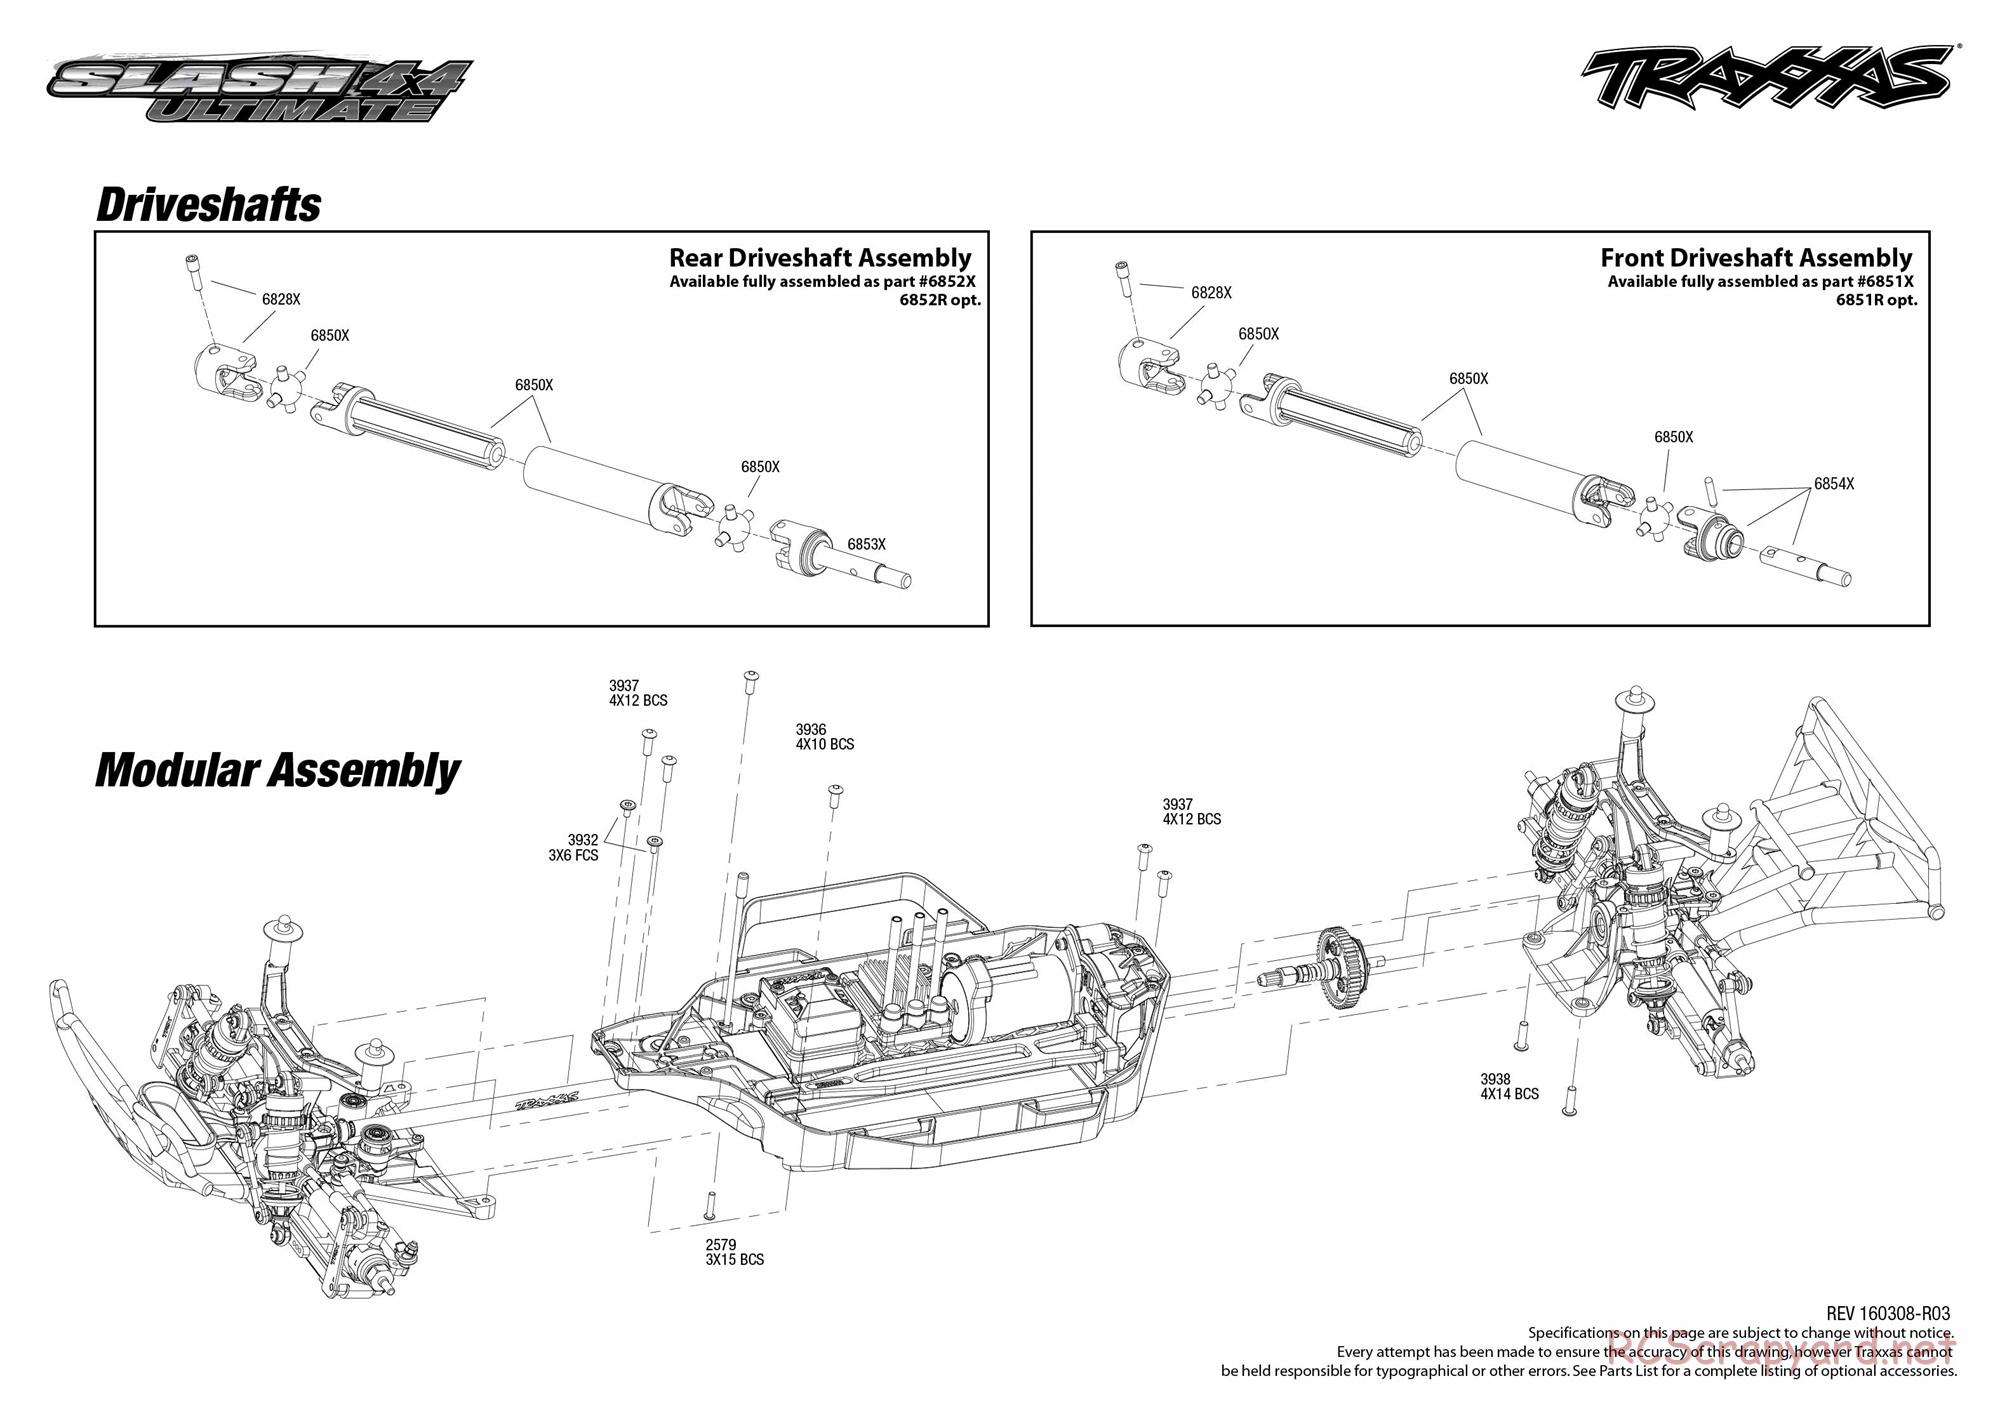 Traxxas - Slash 4x4 Ultimate (2015) - Exploded Views - Page 1